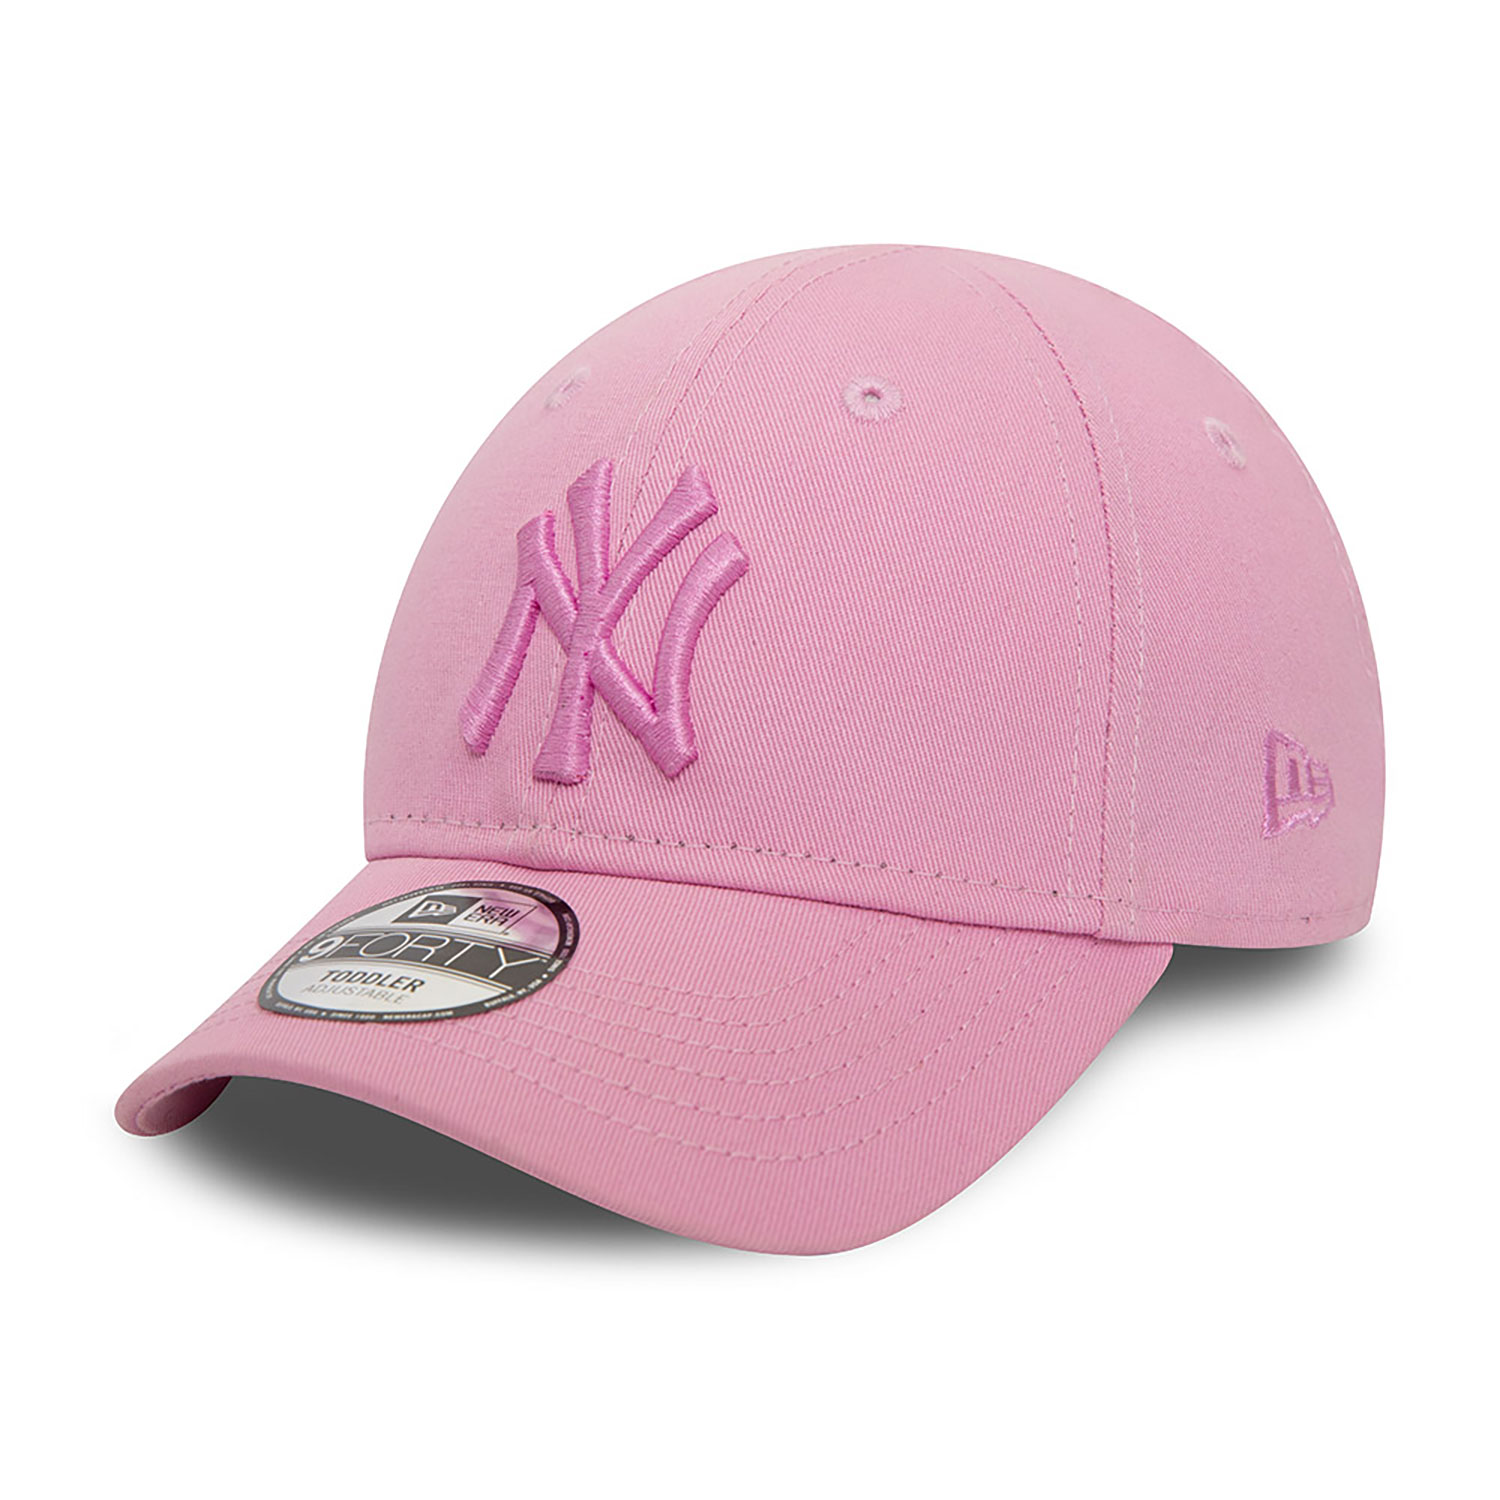 New York Yankees Toddler League Essential Pink 9FORTY Adjustable Cap